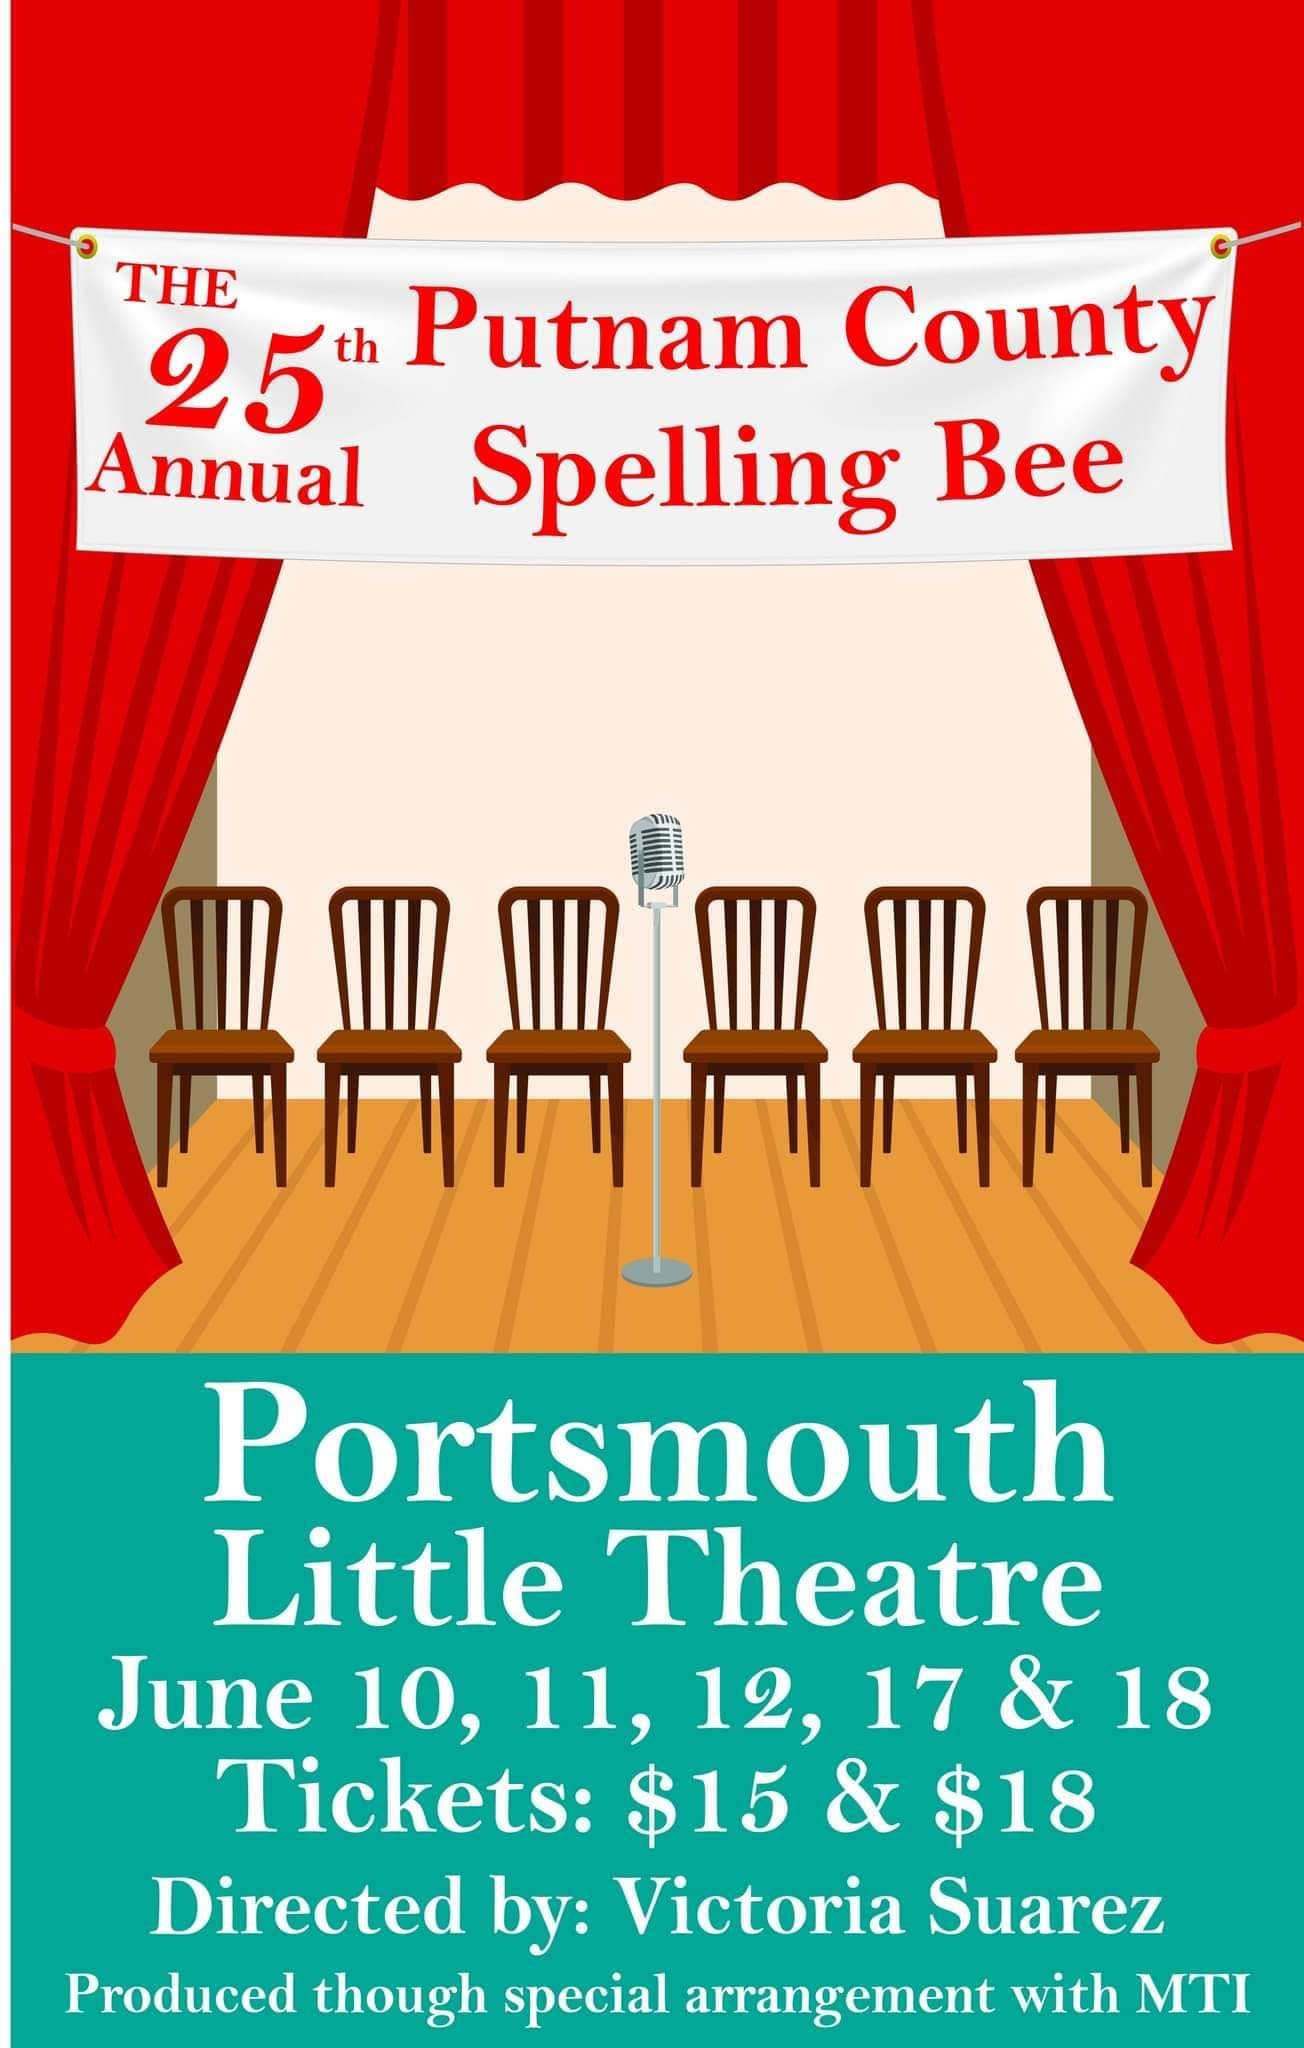 The 25th Annual Putnam County Spelling Bee  on Jun 18, 19:30@Portsmouth Little Theatre - Pick a seat, Buy tickets and Get information on Portsmouth Little Theatre 